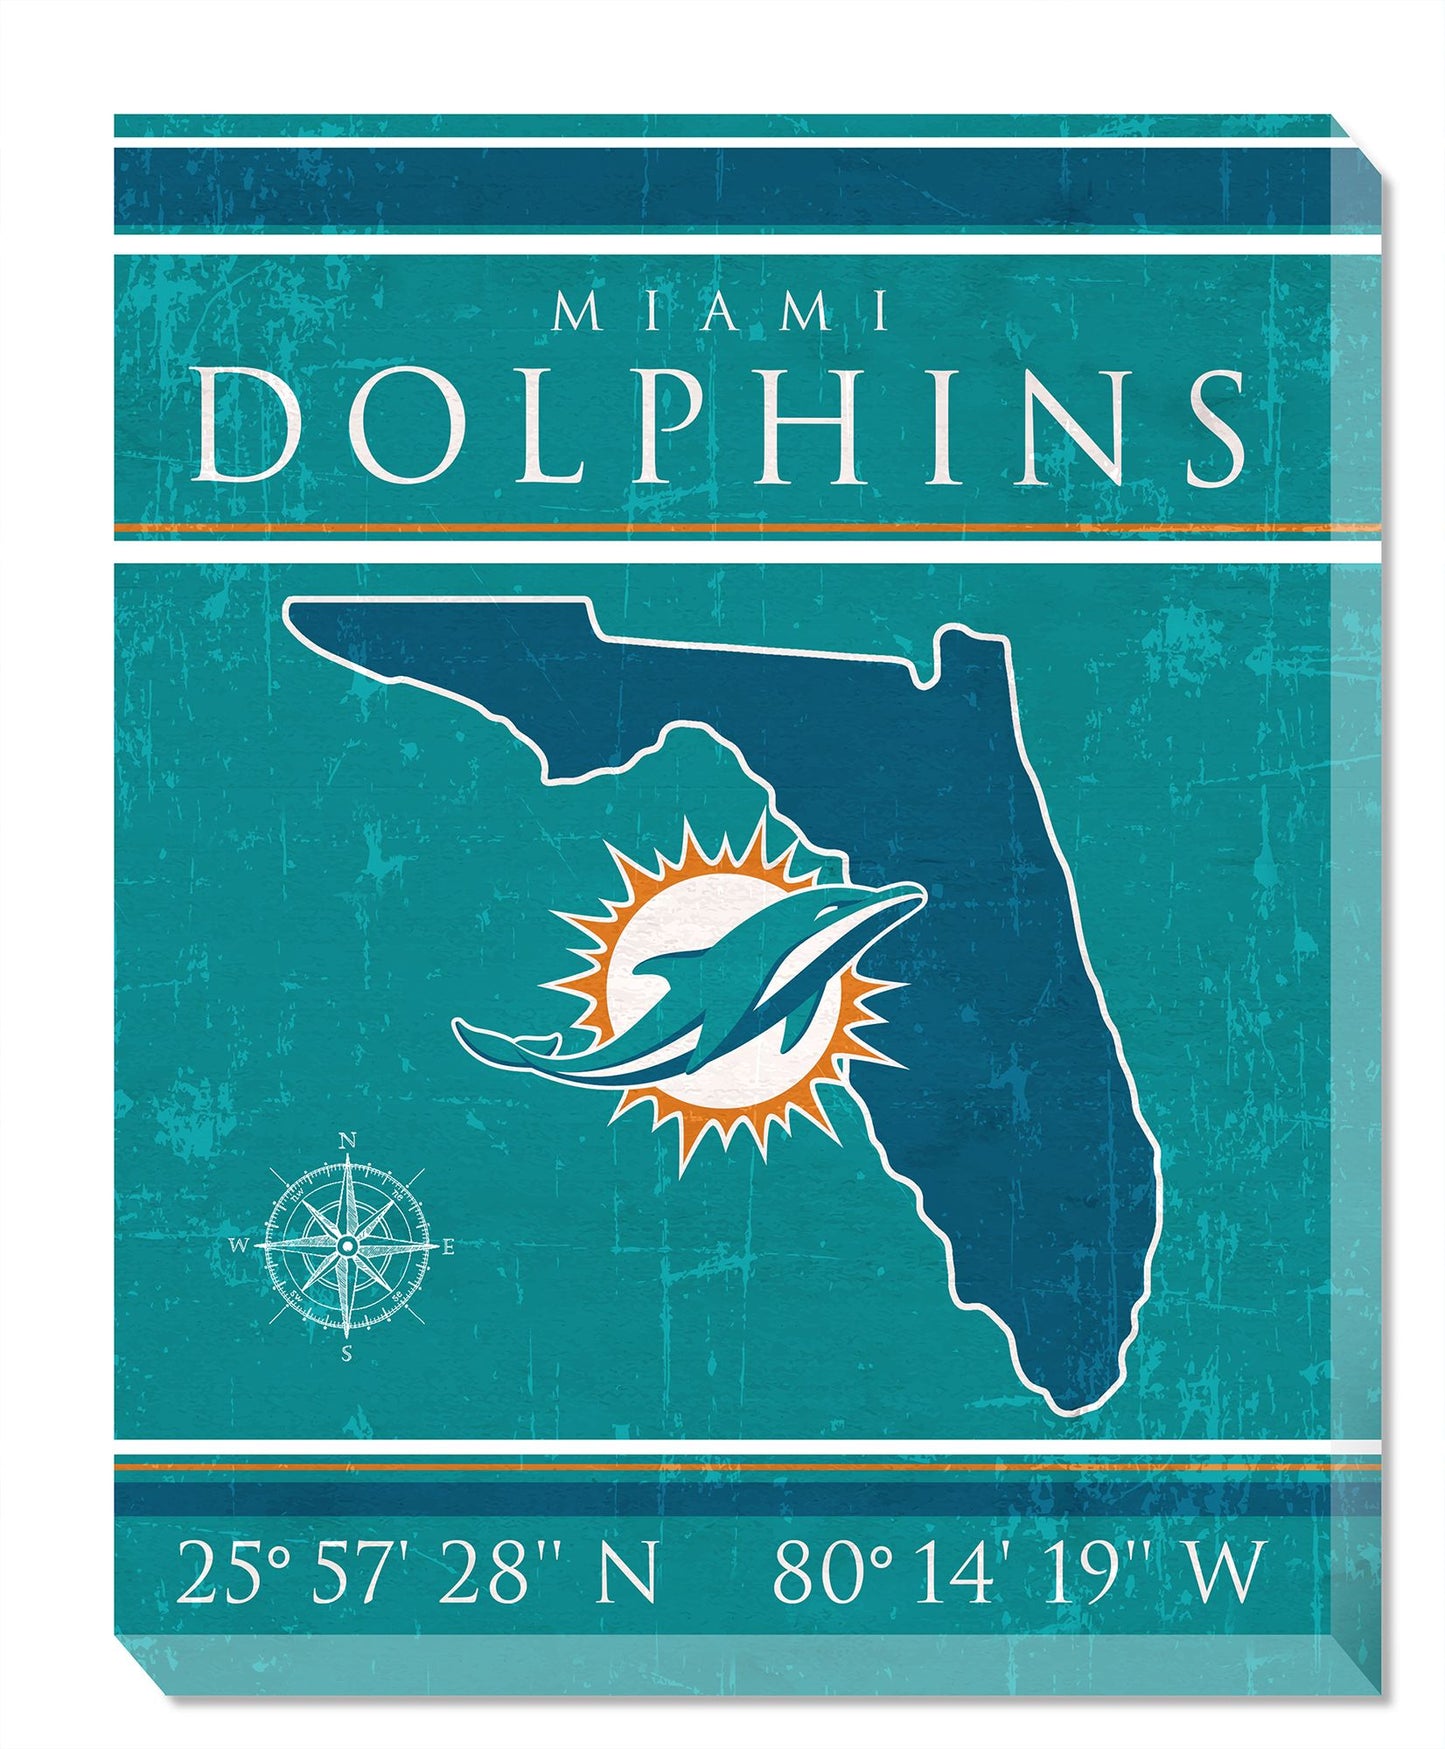 Miami Dolphins 16" x 20" Canvas Sign by Fan Creations